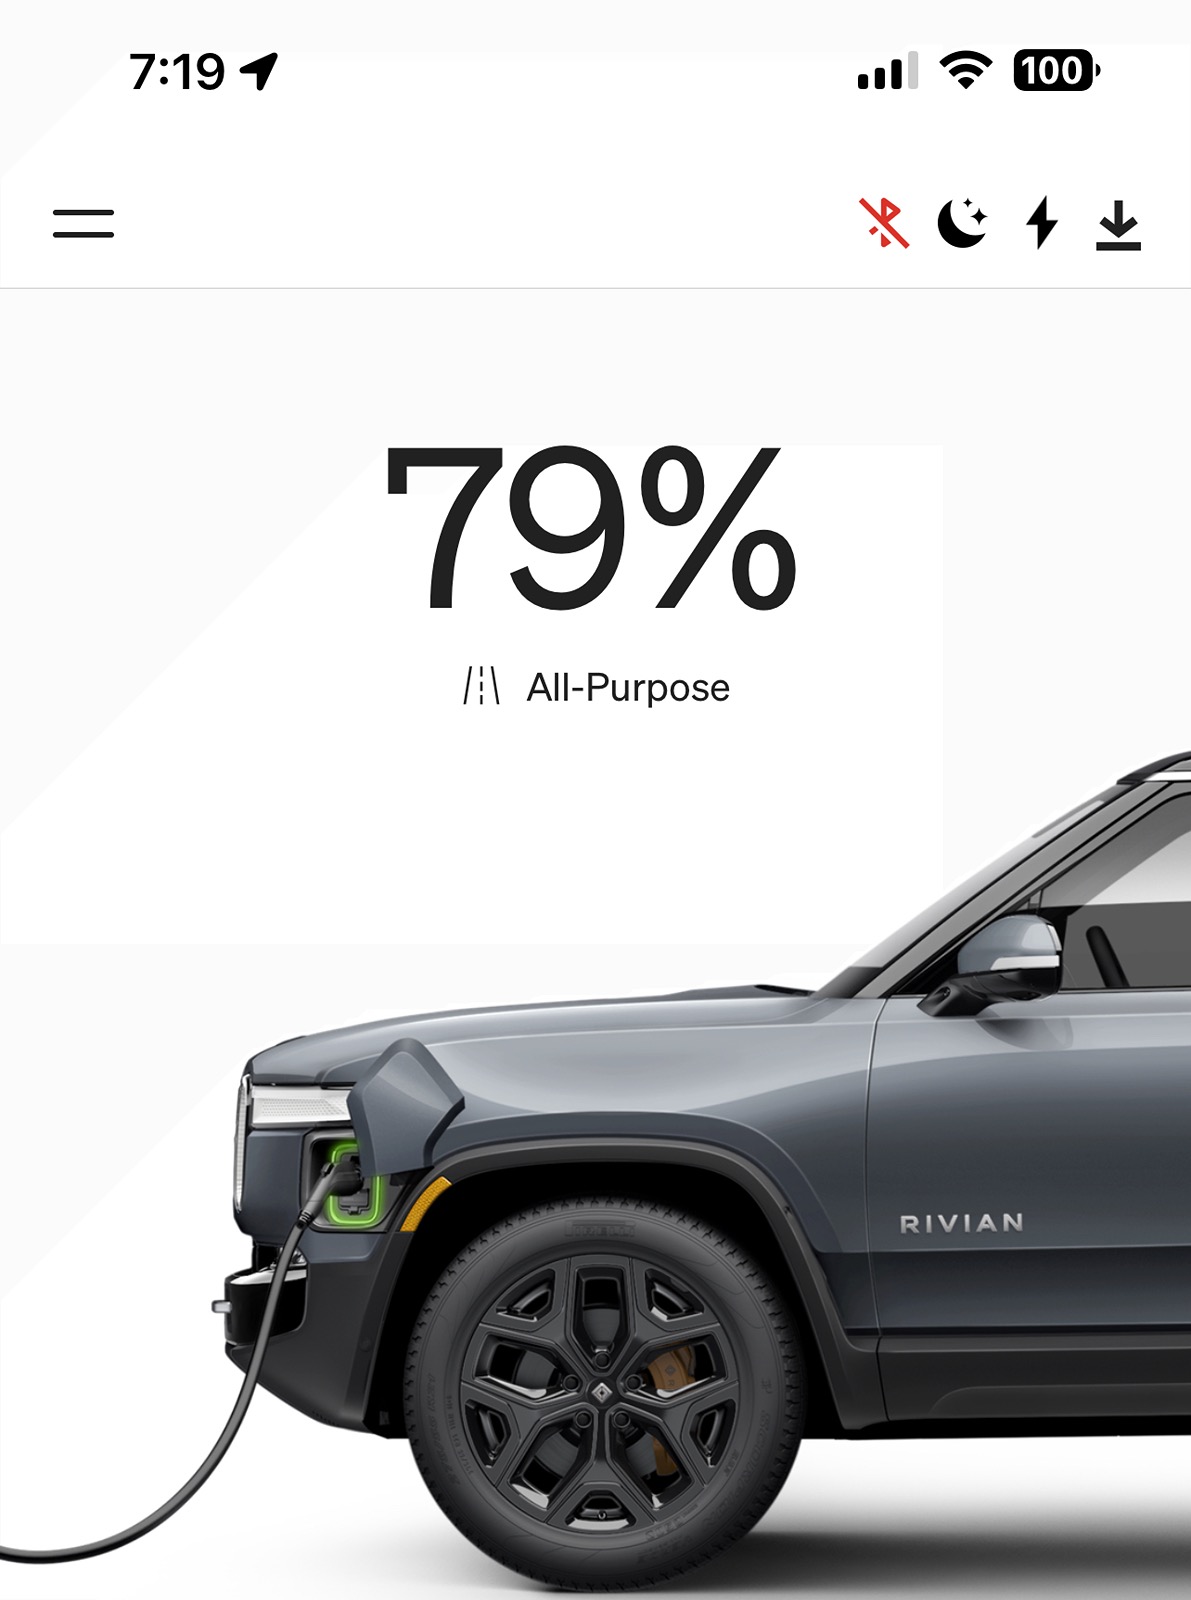 Rivian R1T R1S 2024.11.2 Software Update Released! => Release Notes: Send Navigation, Mapping, Charging Feedback/Scores + Rear Display Improvements + More IMG_1947